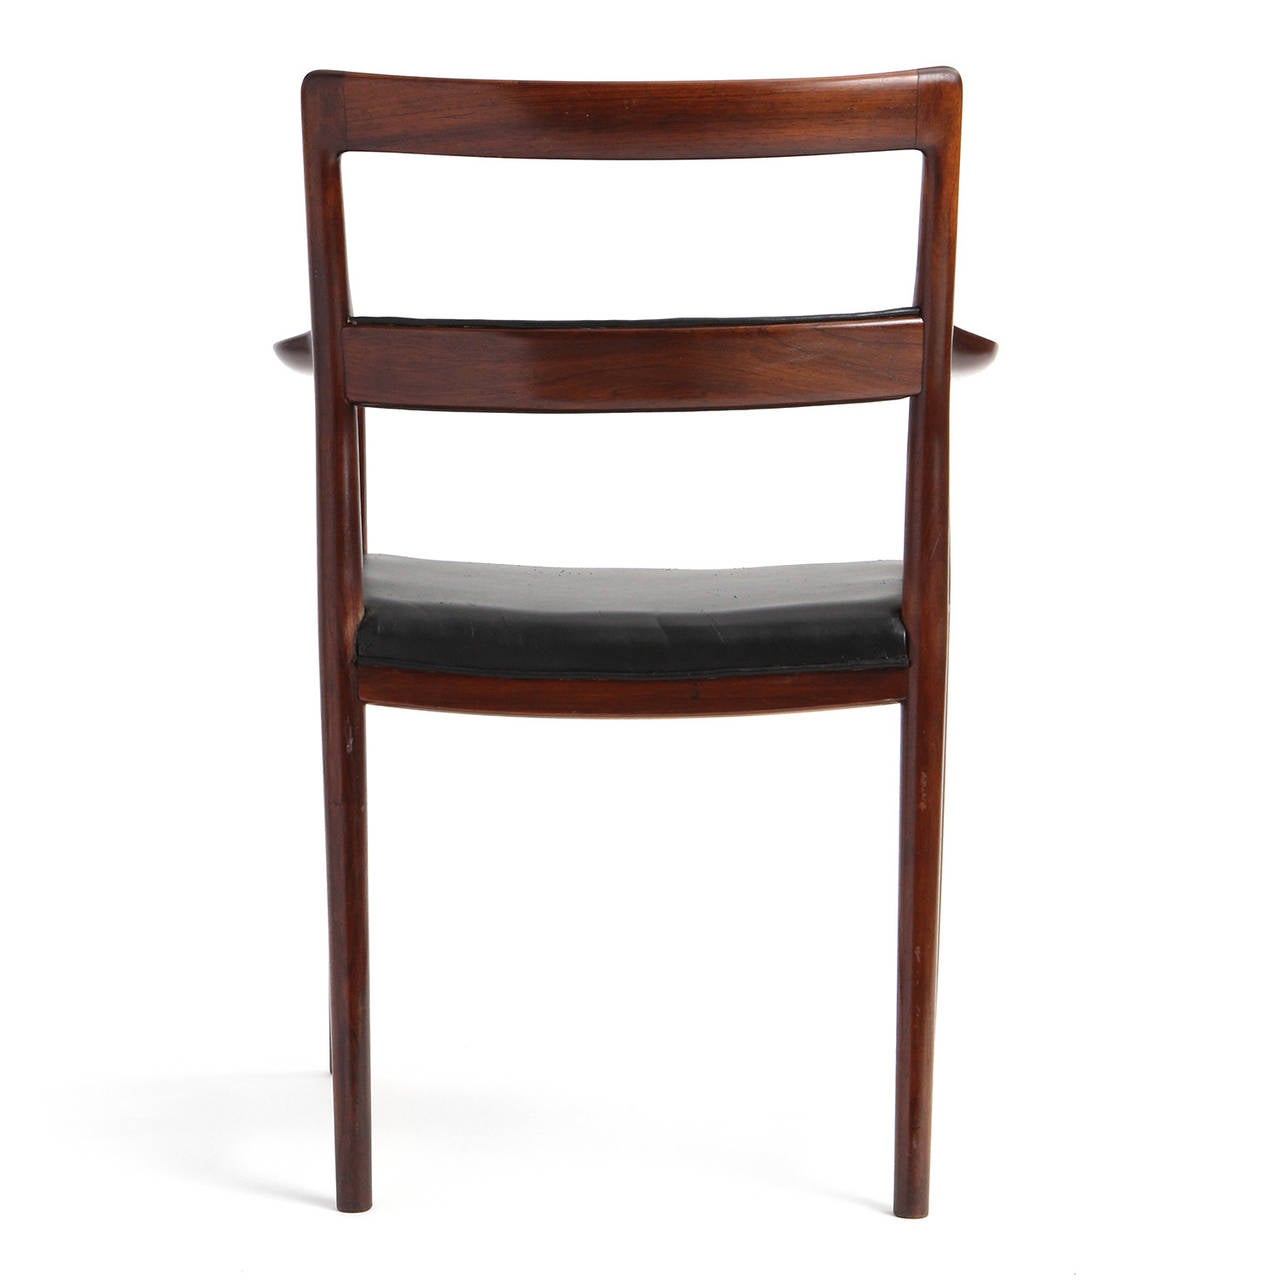 Mid-20th Century Rosewood Dining Chairs by Helge Vestergaard-Jensen